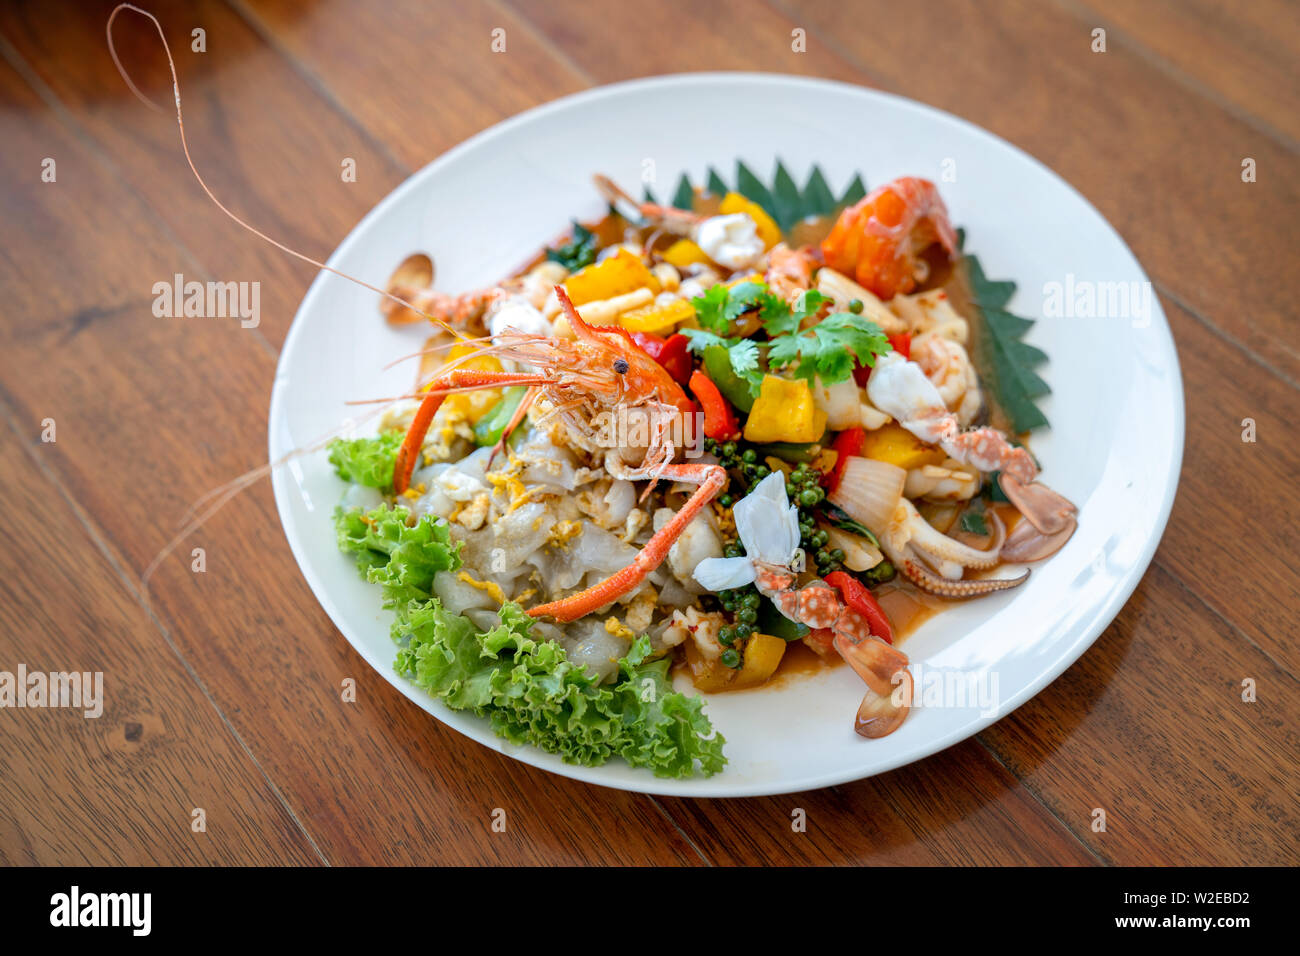 Seafood Thai mixxed together between boiled shrimp, crab, squid and colourful vegetable in dish on wood table in restaurant. Stock Photo